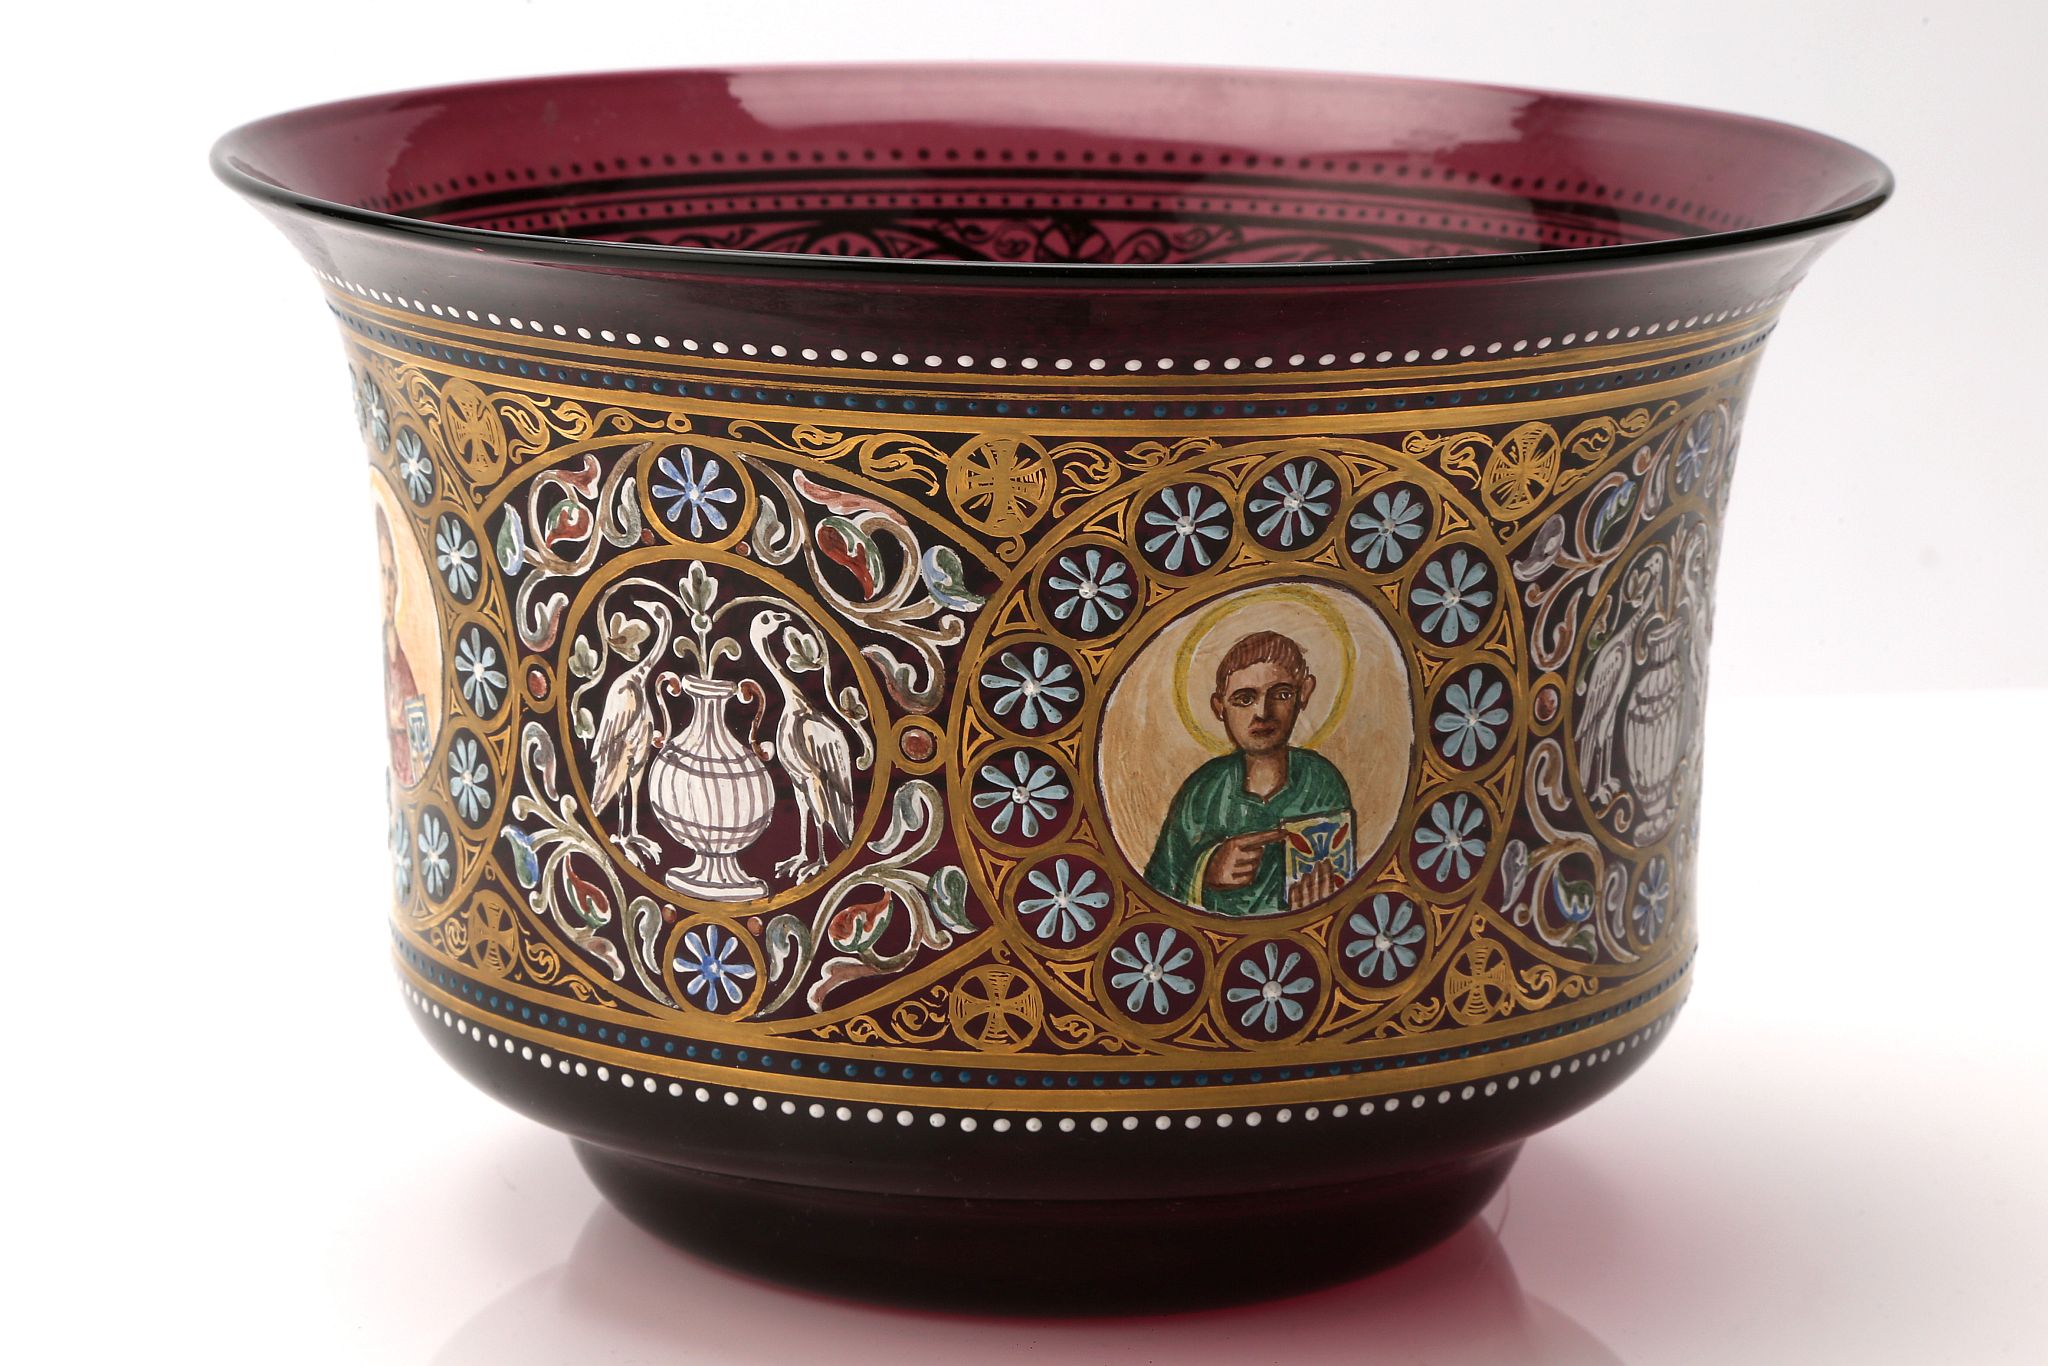 A Venetian Historismus golded and enamelled glass bowl, early 20th century, of deep amethyst tint, - Image 4 of 6